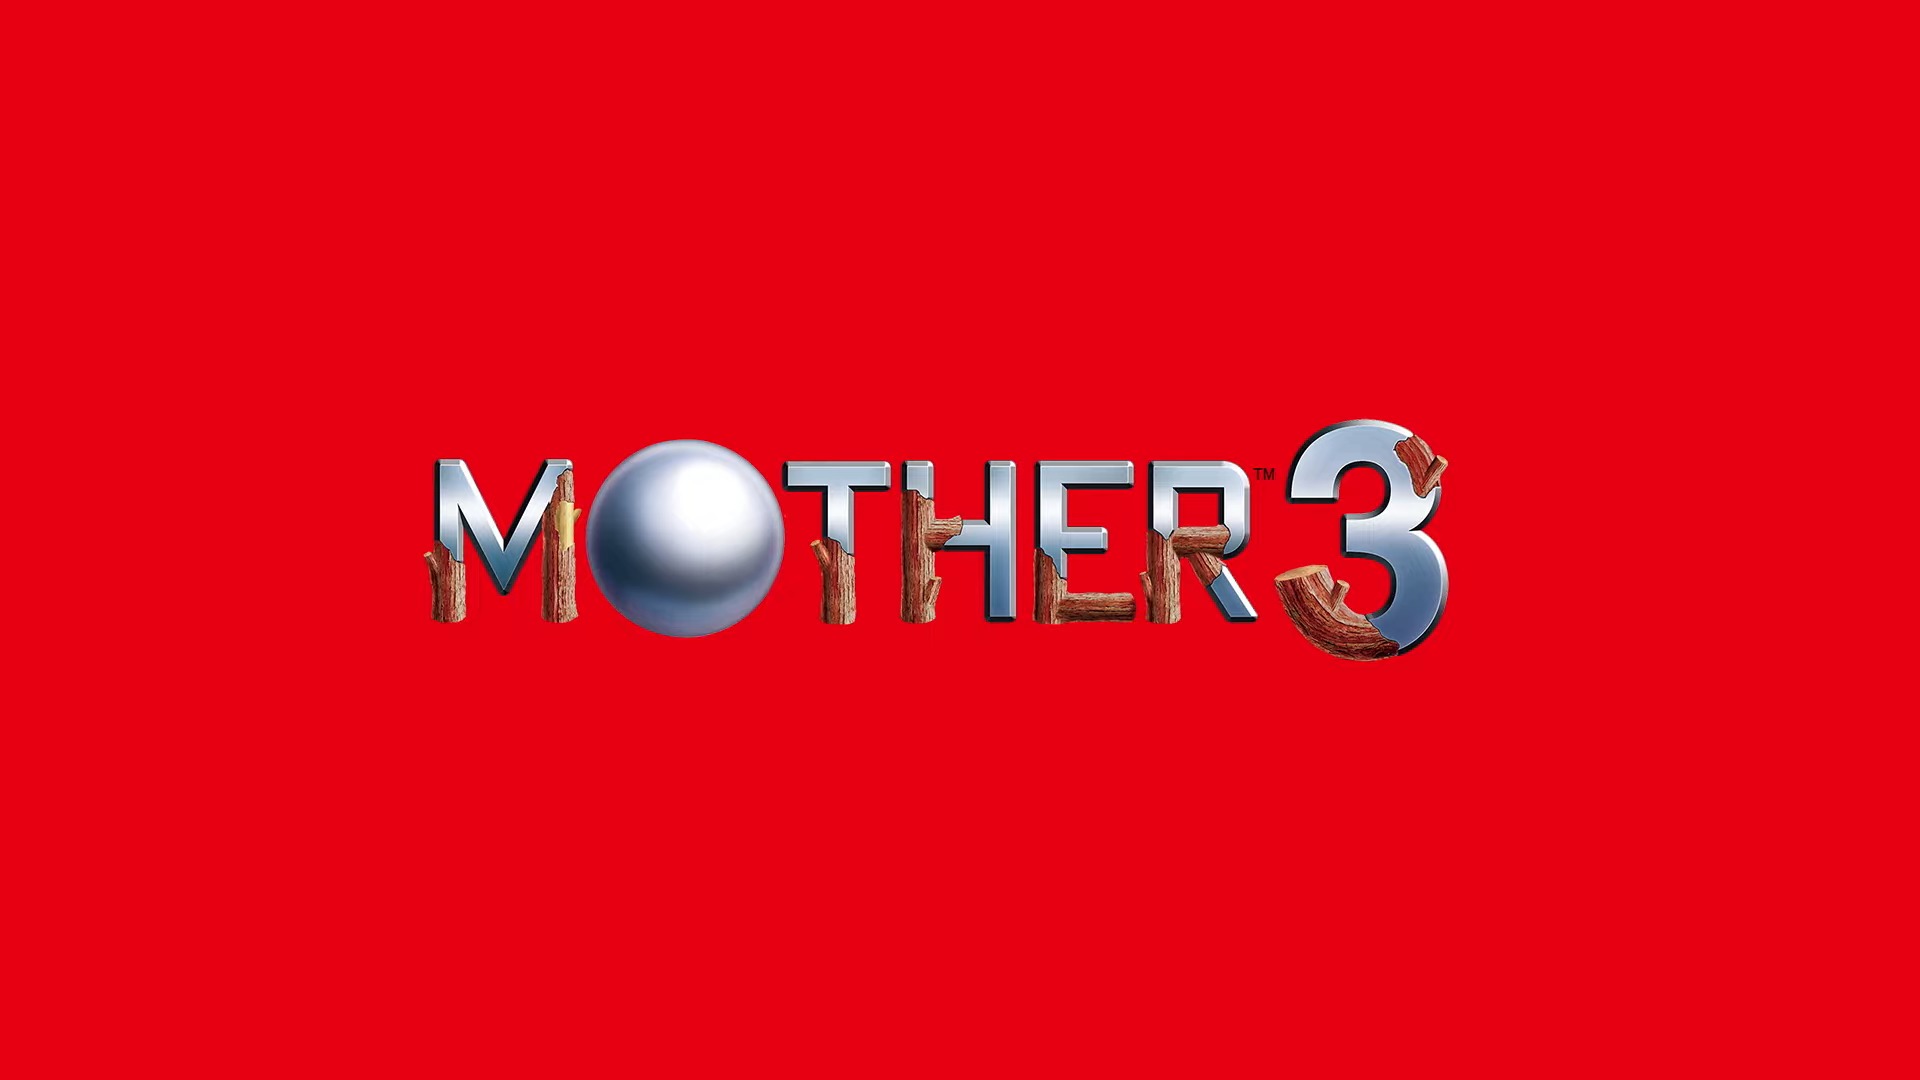 The logo for Mother 3, a combination of wood and chrome metal aesthetic, on a red background